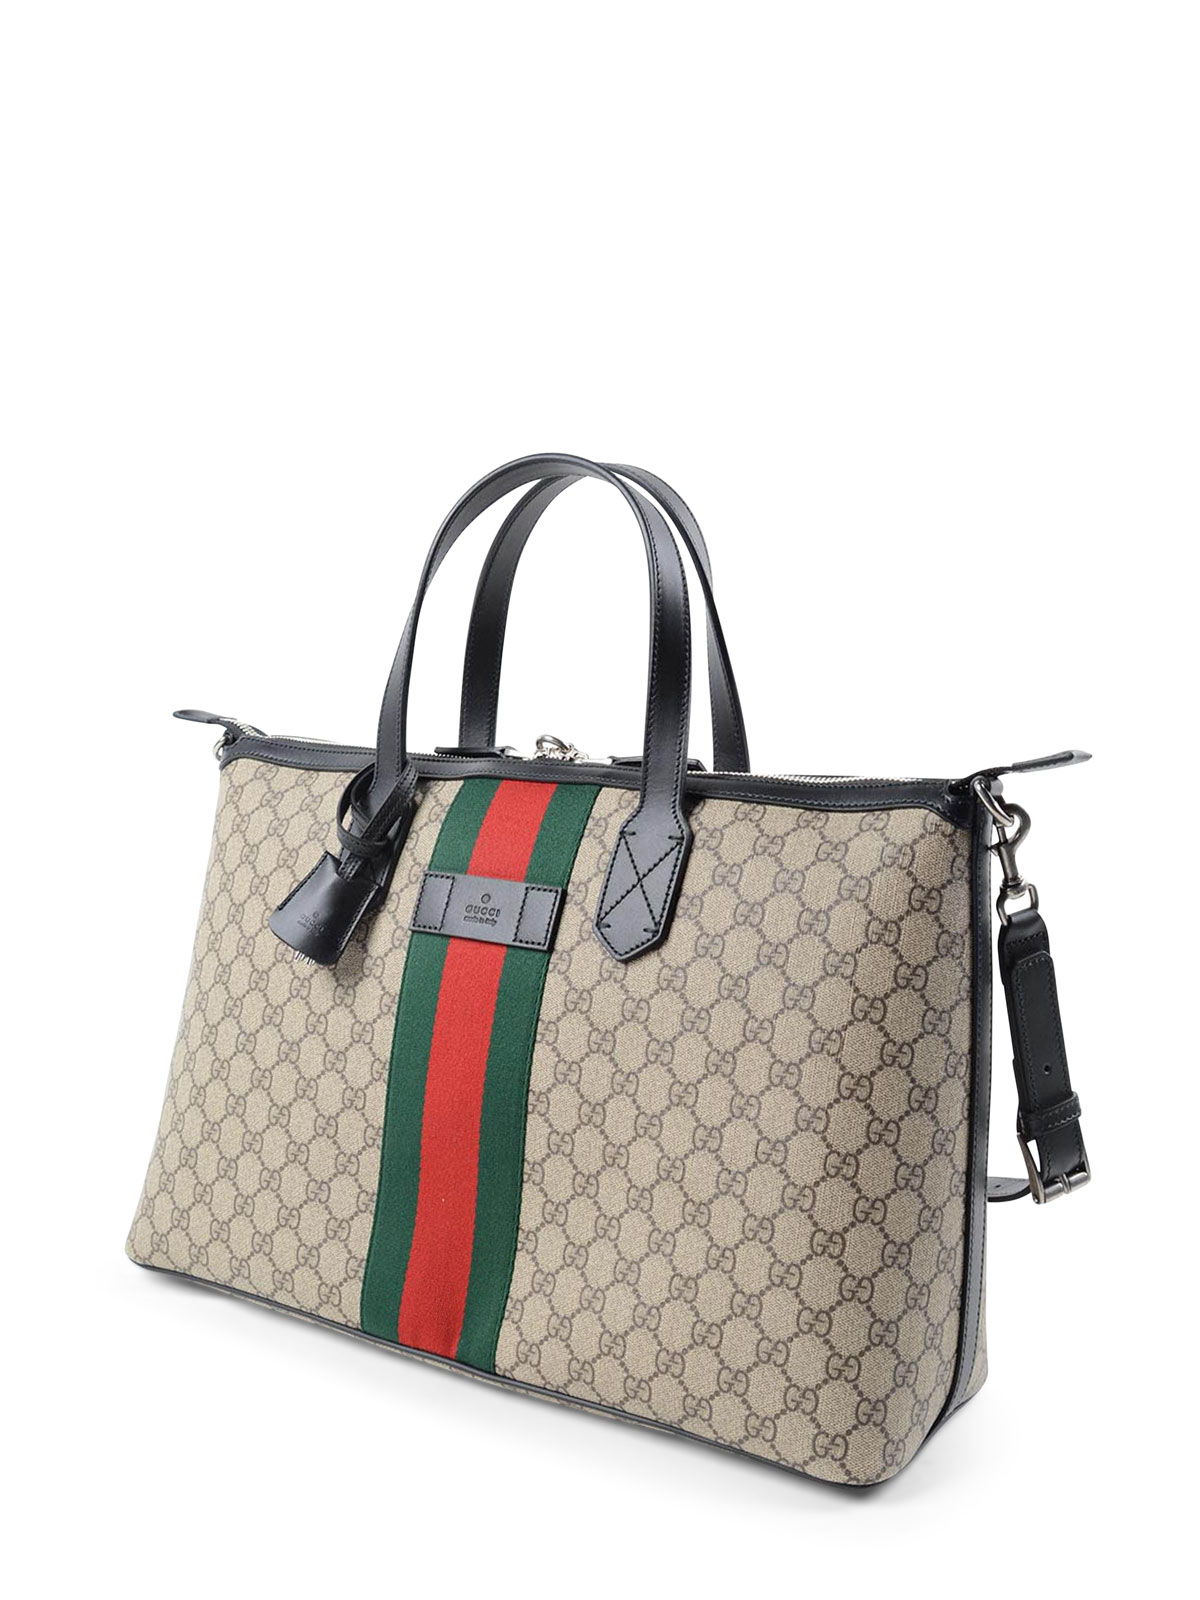 GG Supreme canvas duffle bag by Gucci - Luggage & Travel bags | iKRIX